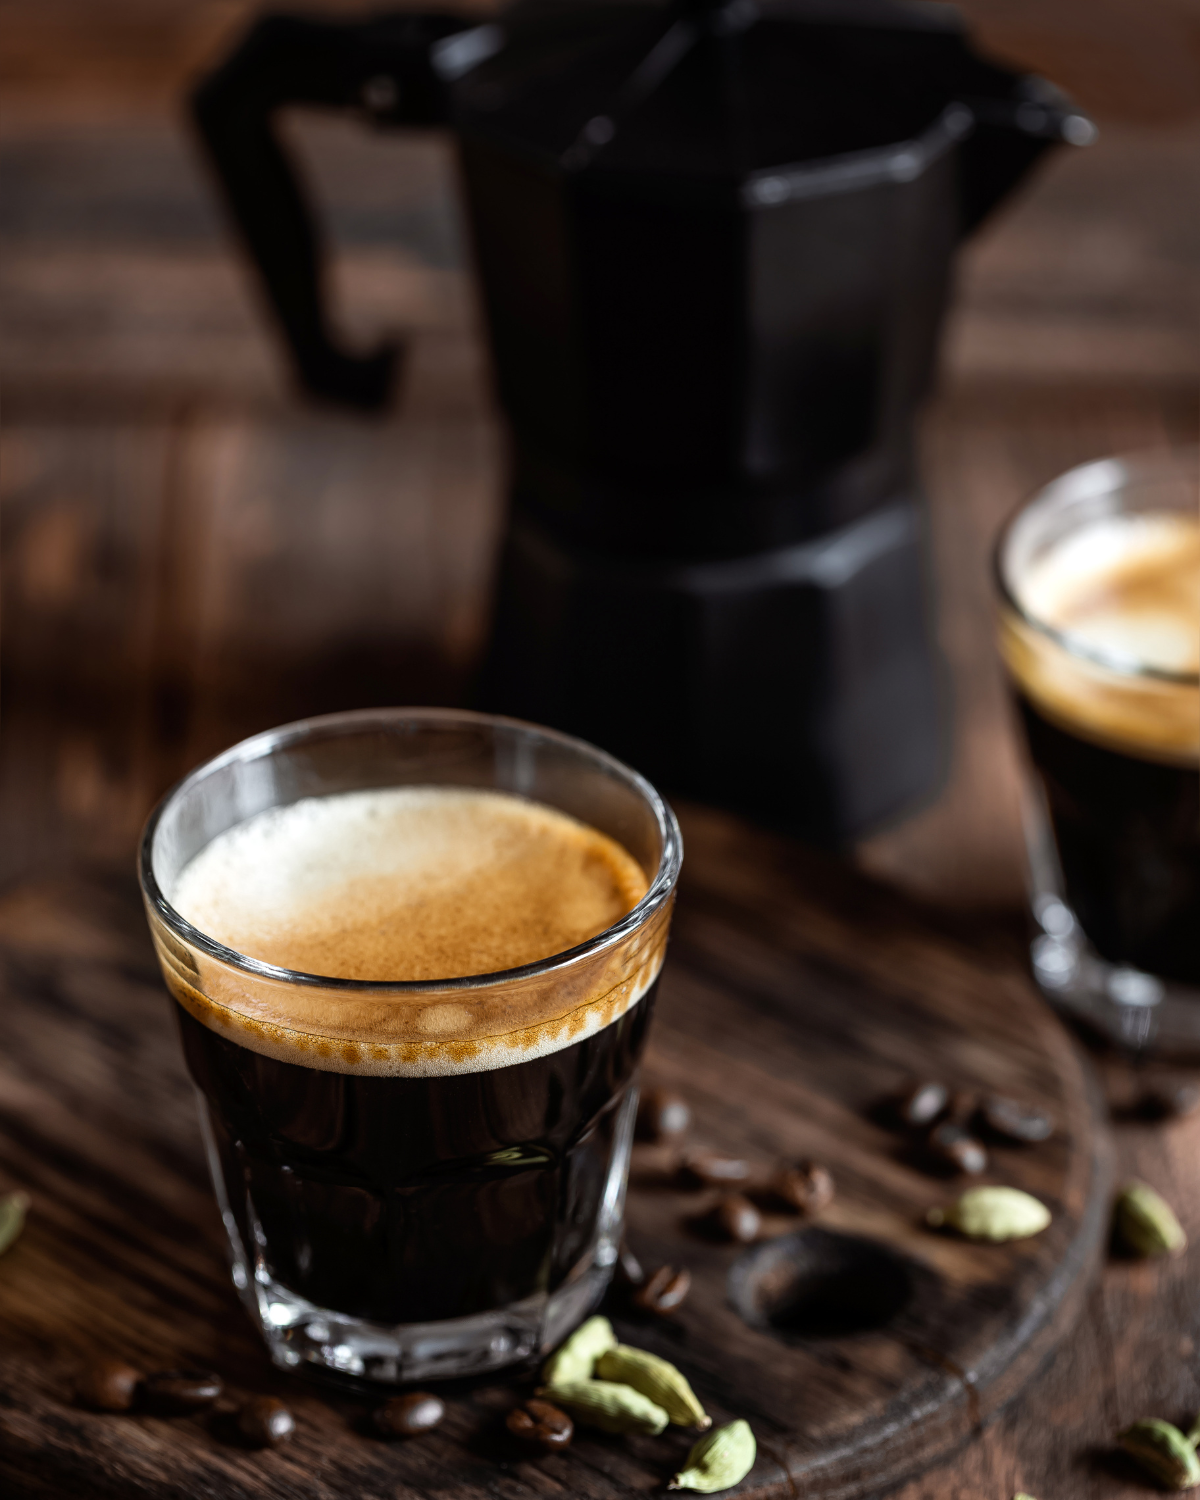 Freshly brewed espresso in a glass cup on a wooden table, with coffee beans and spices scattered around, showcasing the peak flavor of Coffee Secrets' same-day roasted coffee.